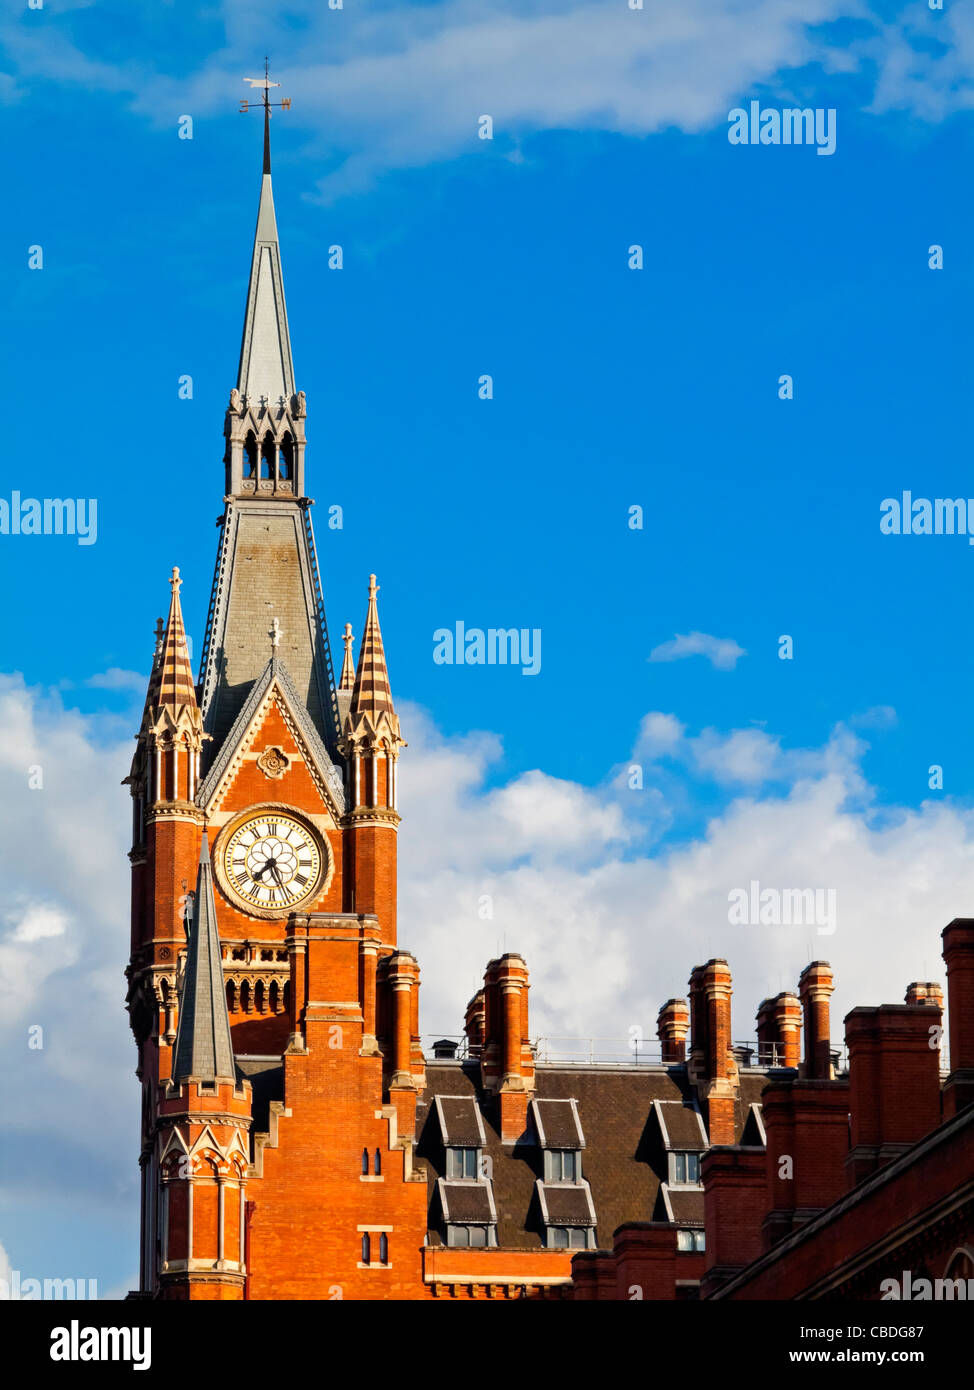 The clock tower of St Pancras Station and Marriott hotel in London England UK built in 1866 designed by George Gilbert Scott Stock Photo